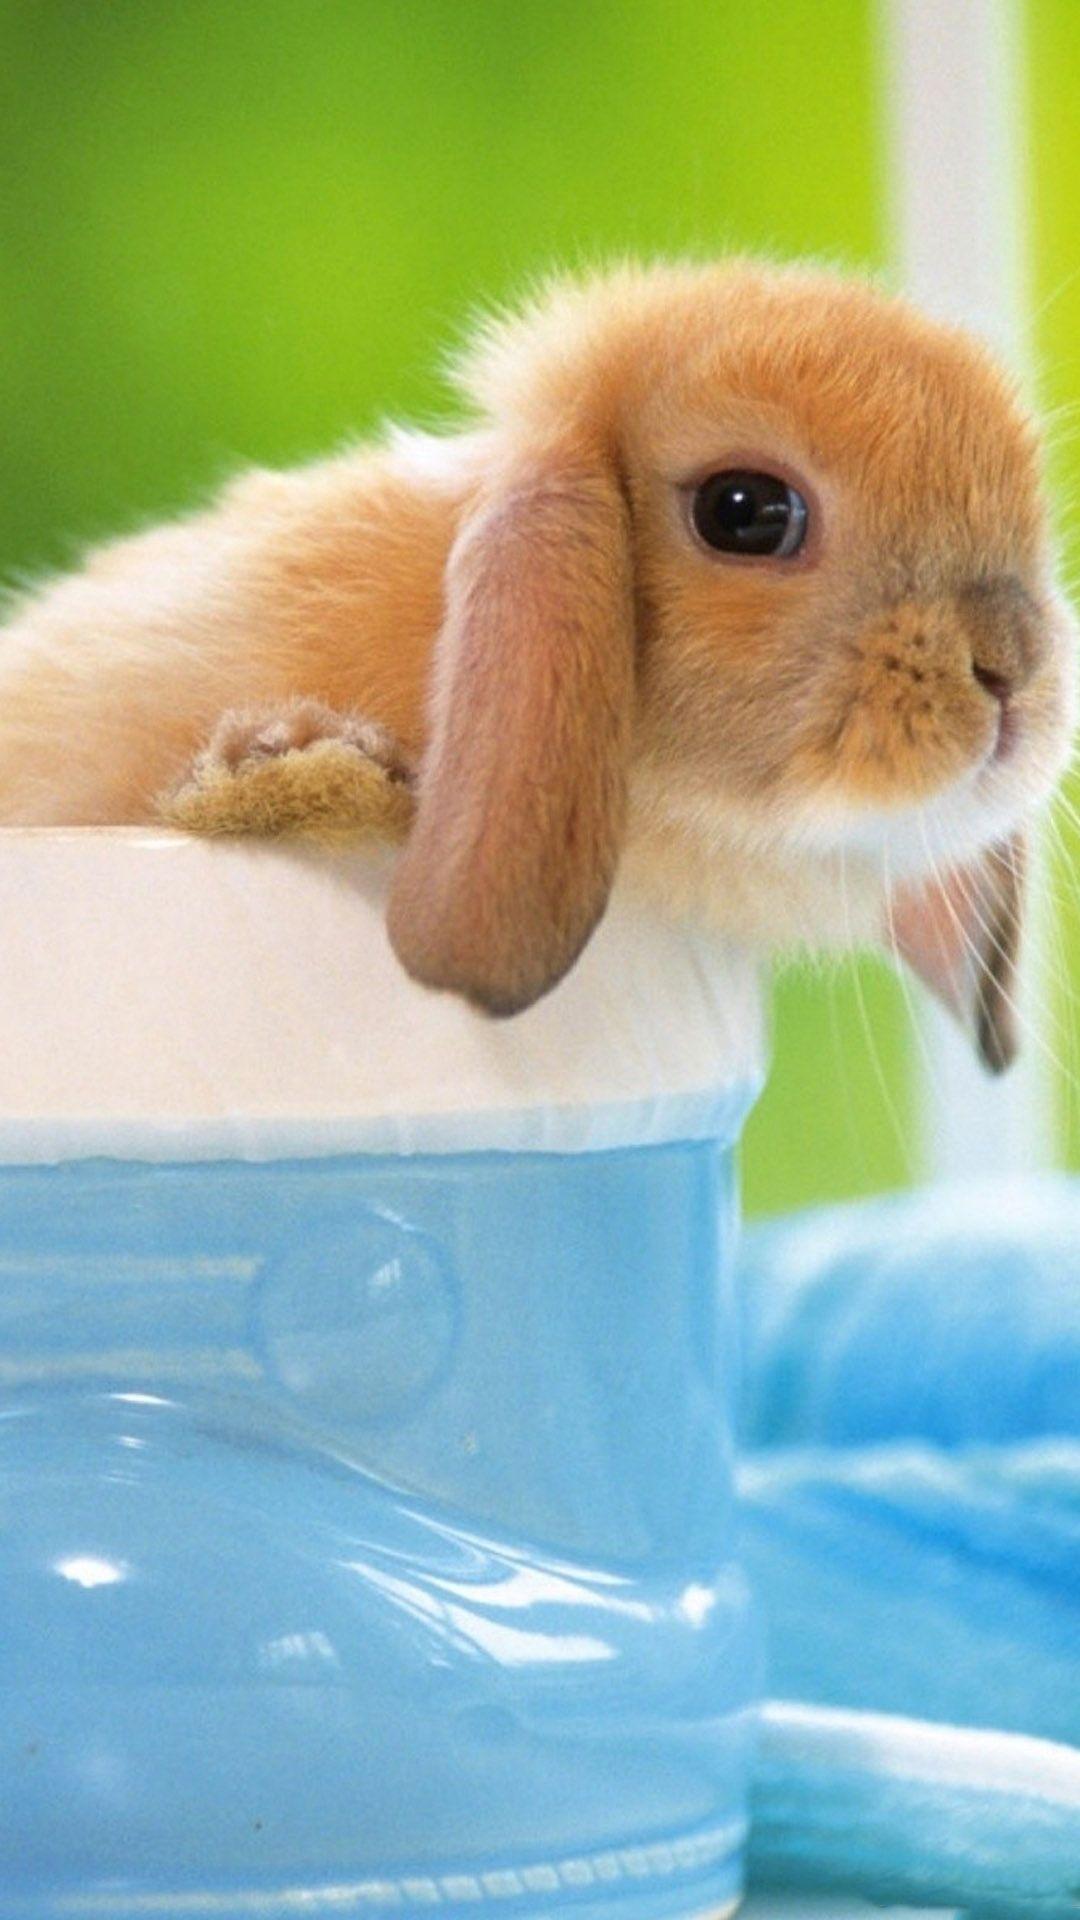 Cute Bunny IPhone Wallpaper HD  IPhone Wallpapers  iPhone Wallpapers